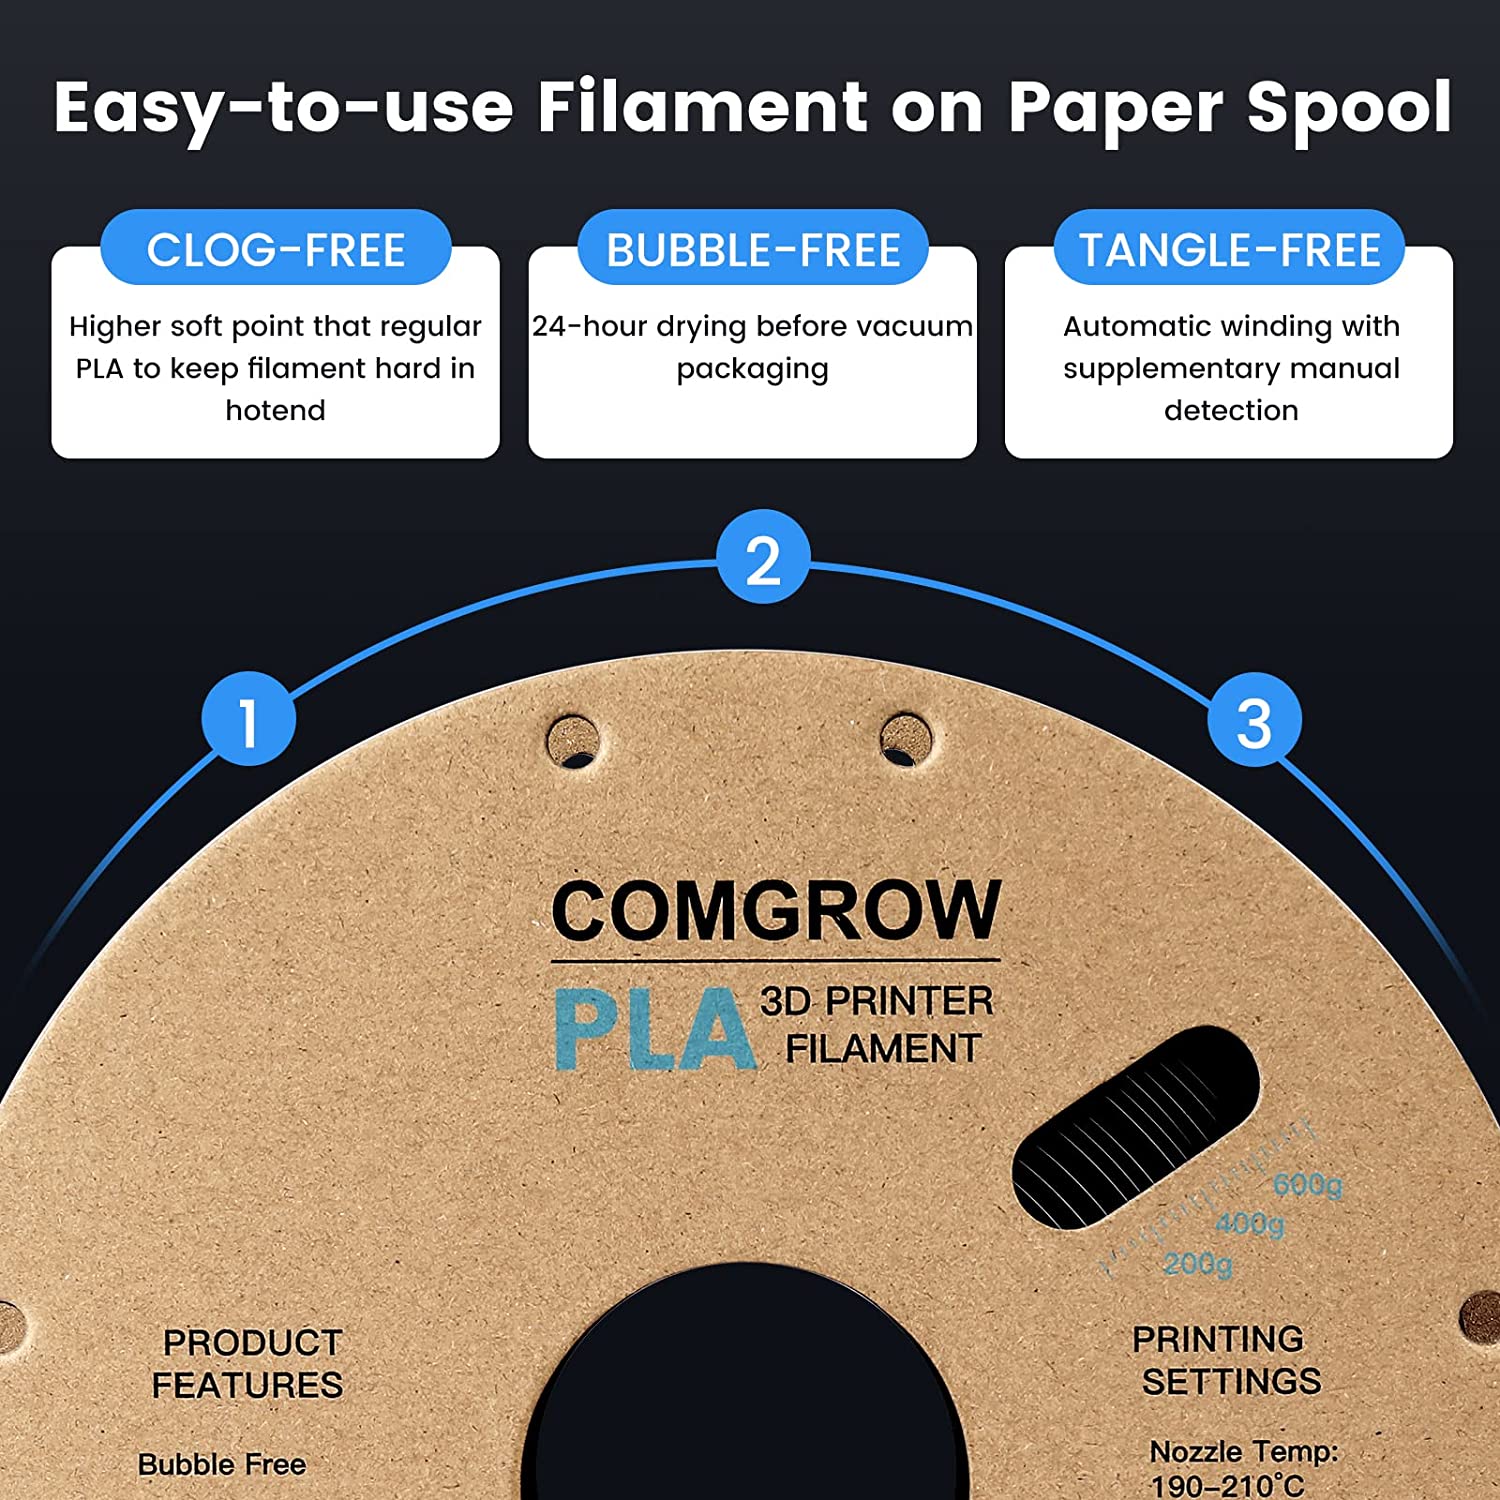 easy-to-use filament on paper spool with features of clog-free,bubble-free and tangle-free